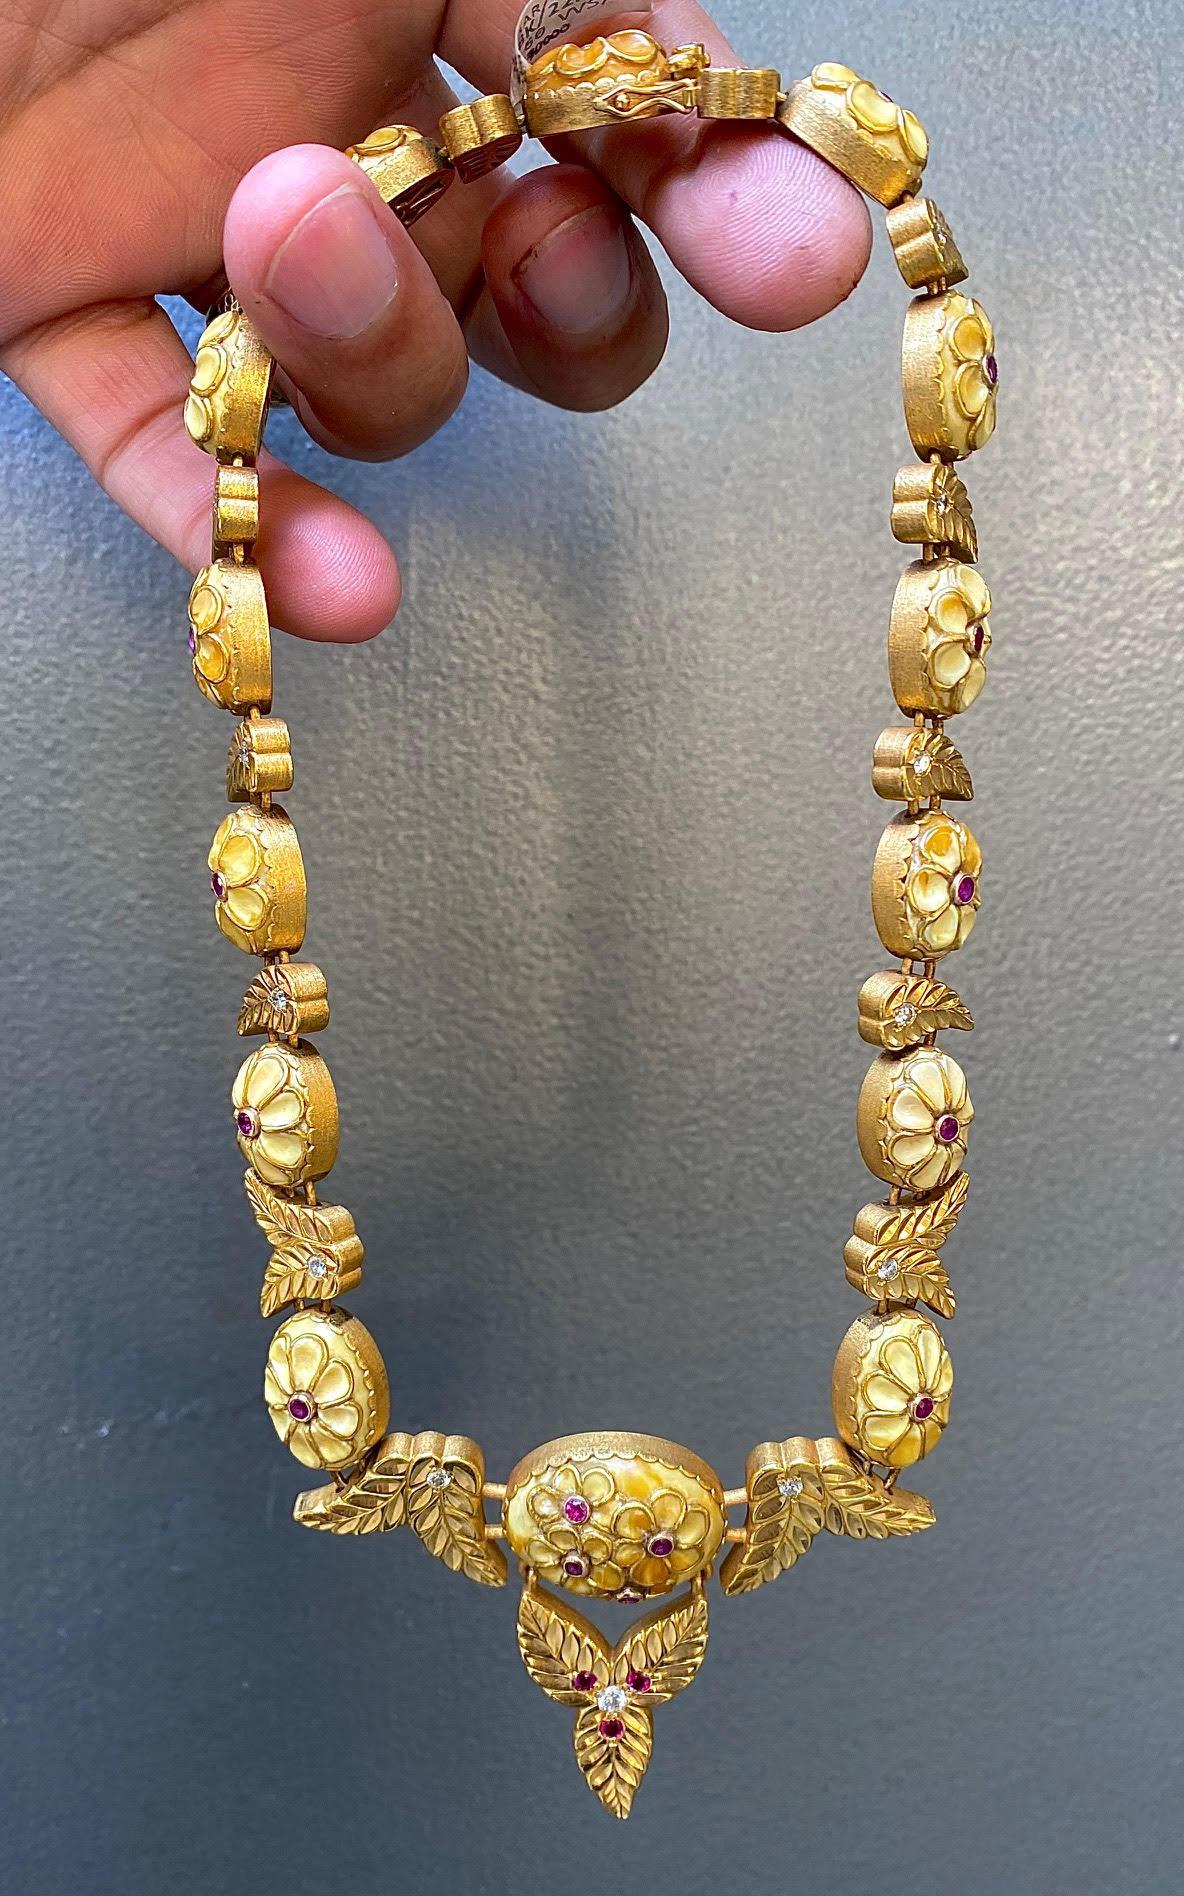 24k gold necklace for sale